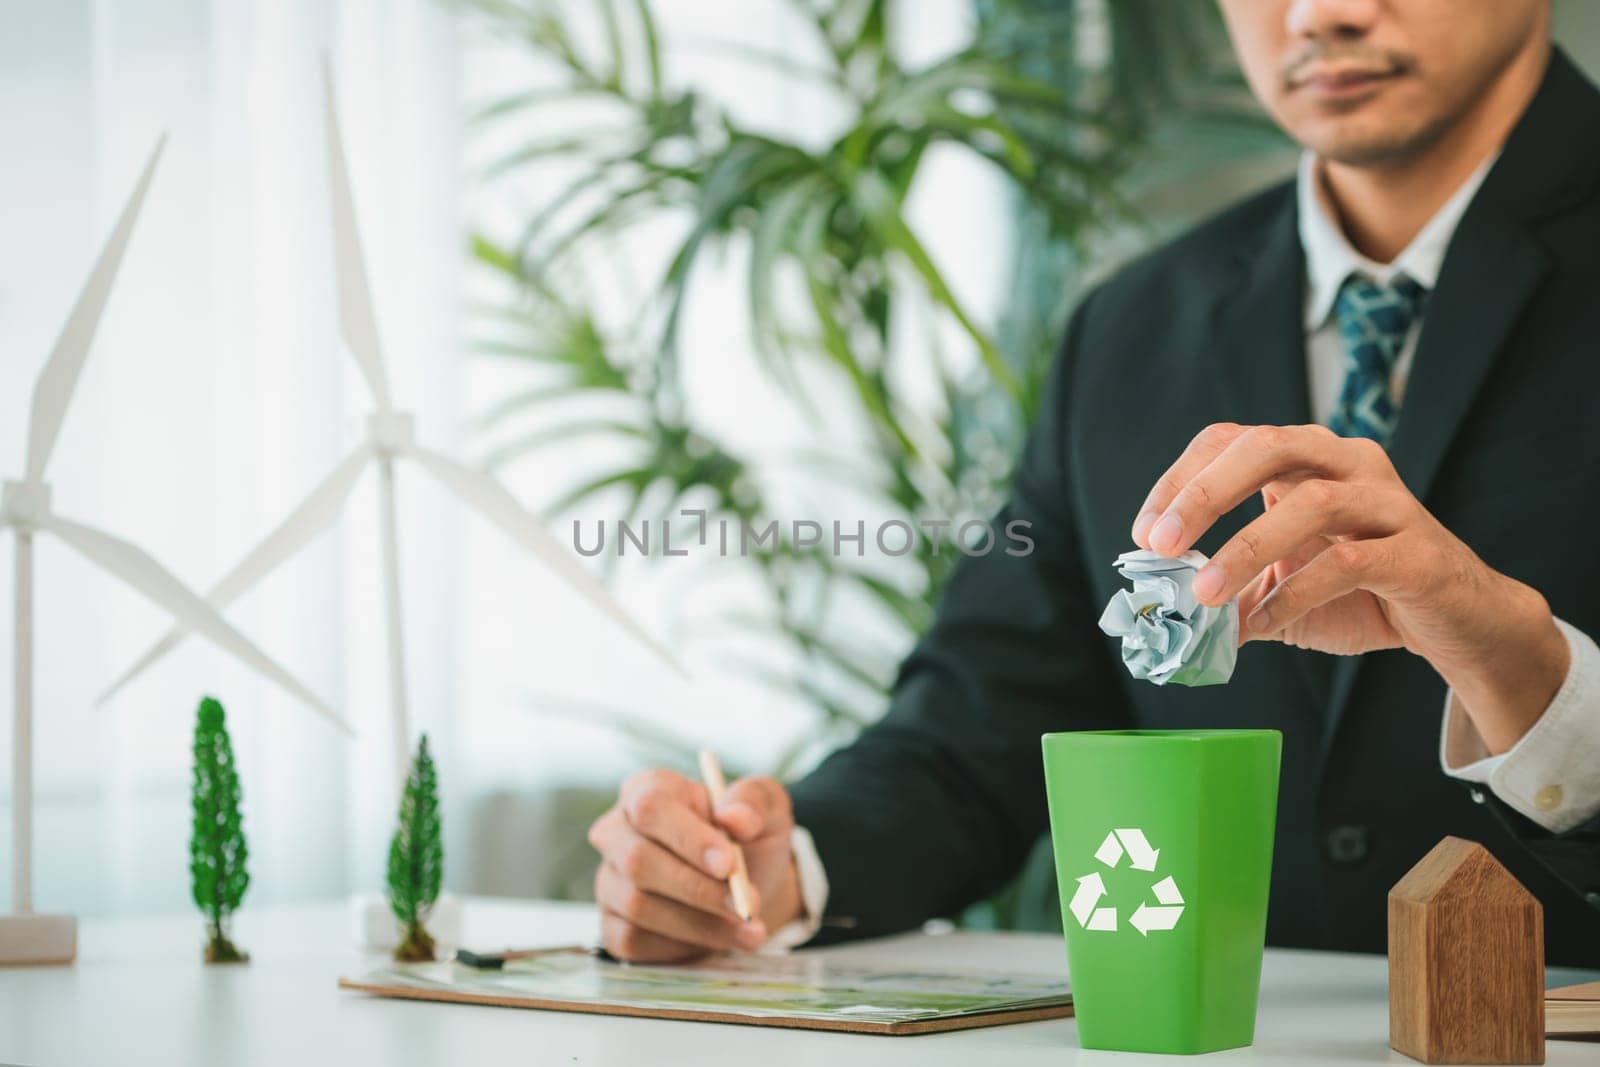 Businessman put paper waste on small tiny recycle bin in his office symbolize corporate effort on eco-friendly waste management by recycling for greener environment and zero pollution. Gyre